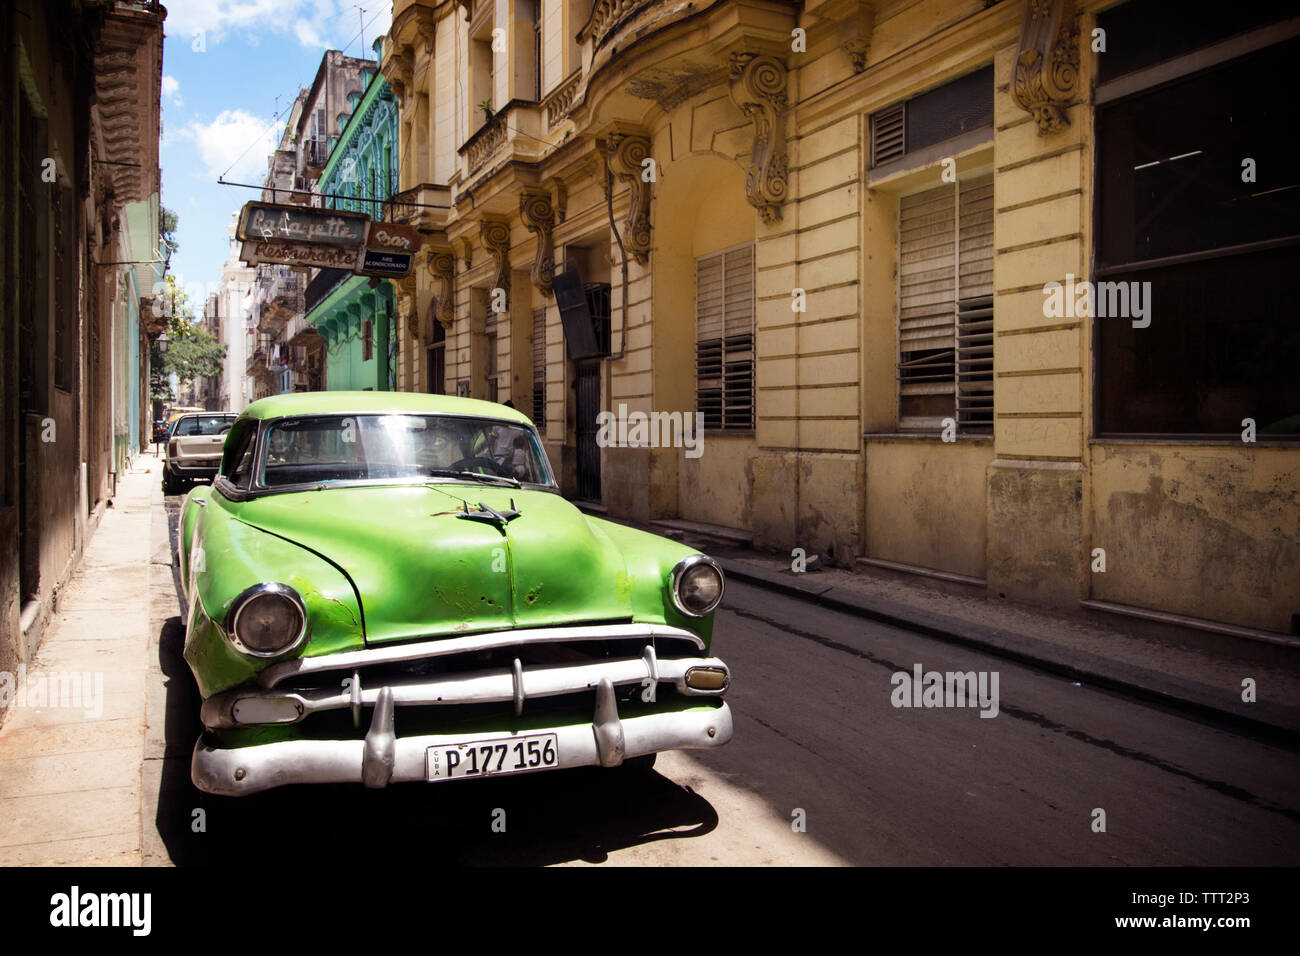 Green vintage car parked on street amidst buildings Stock Photo